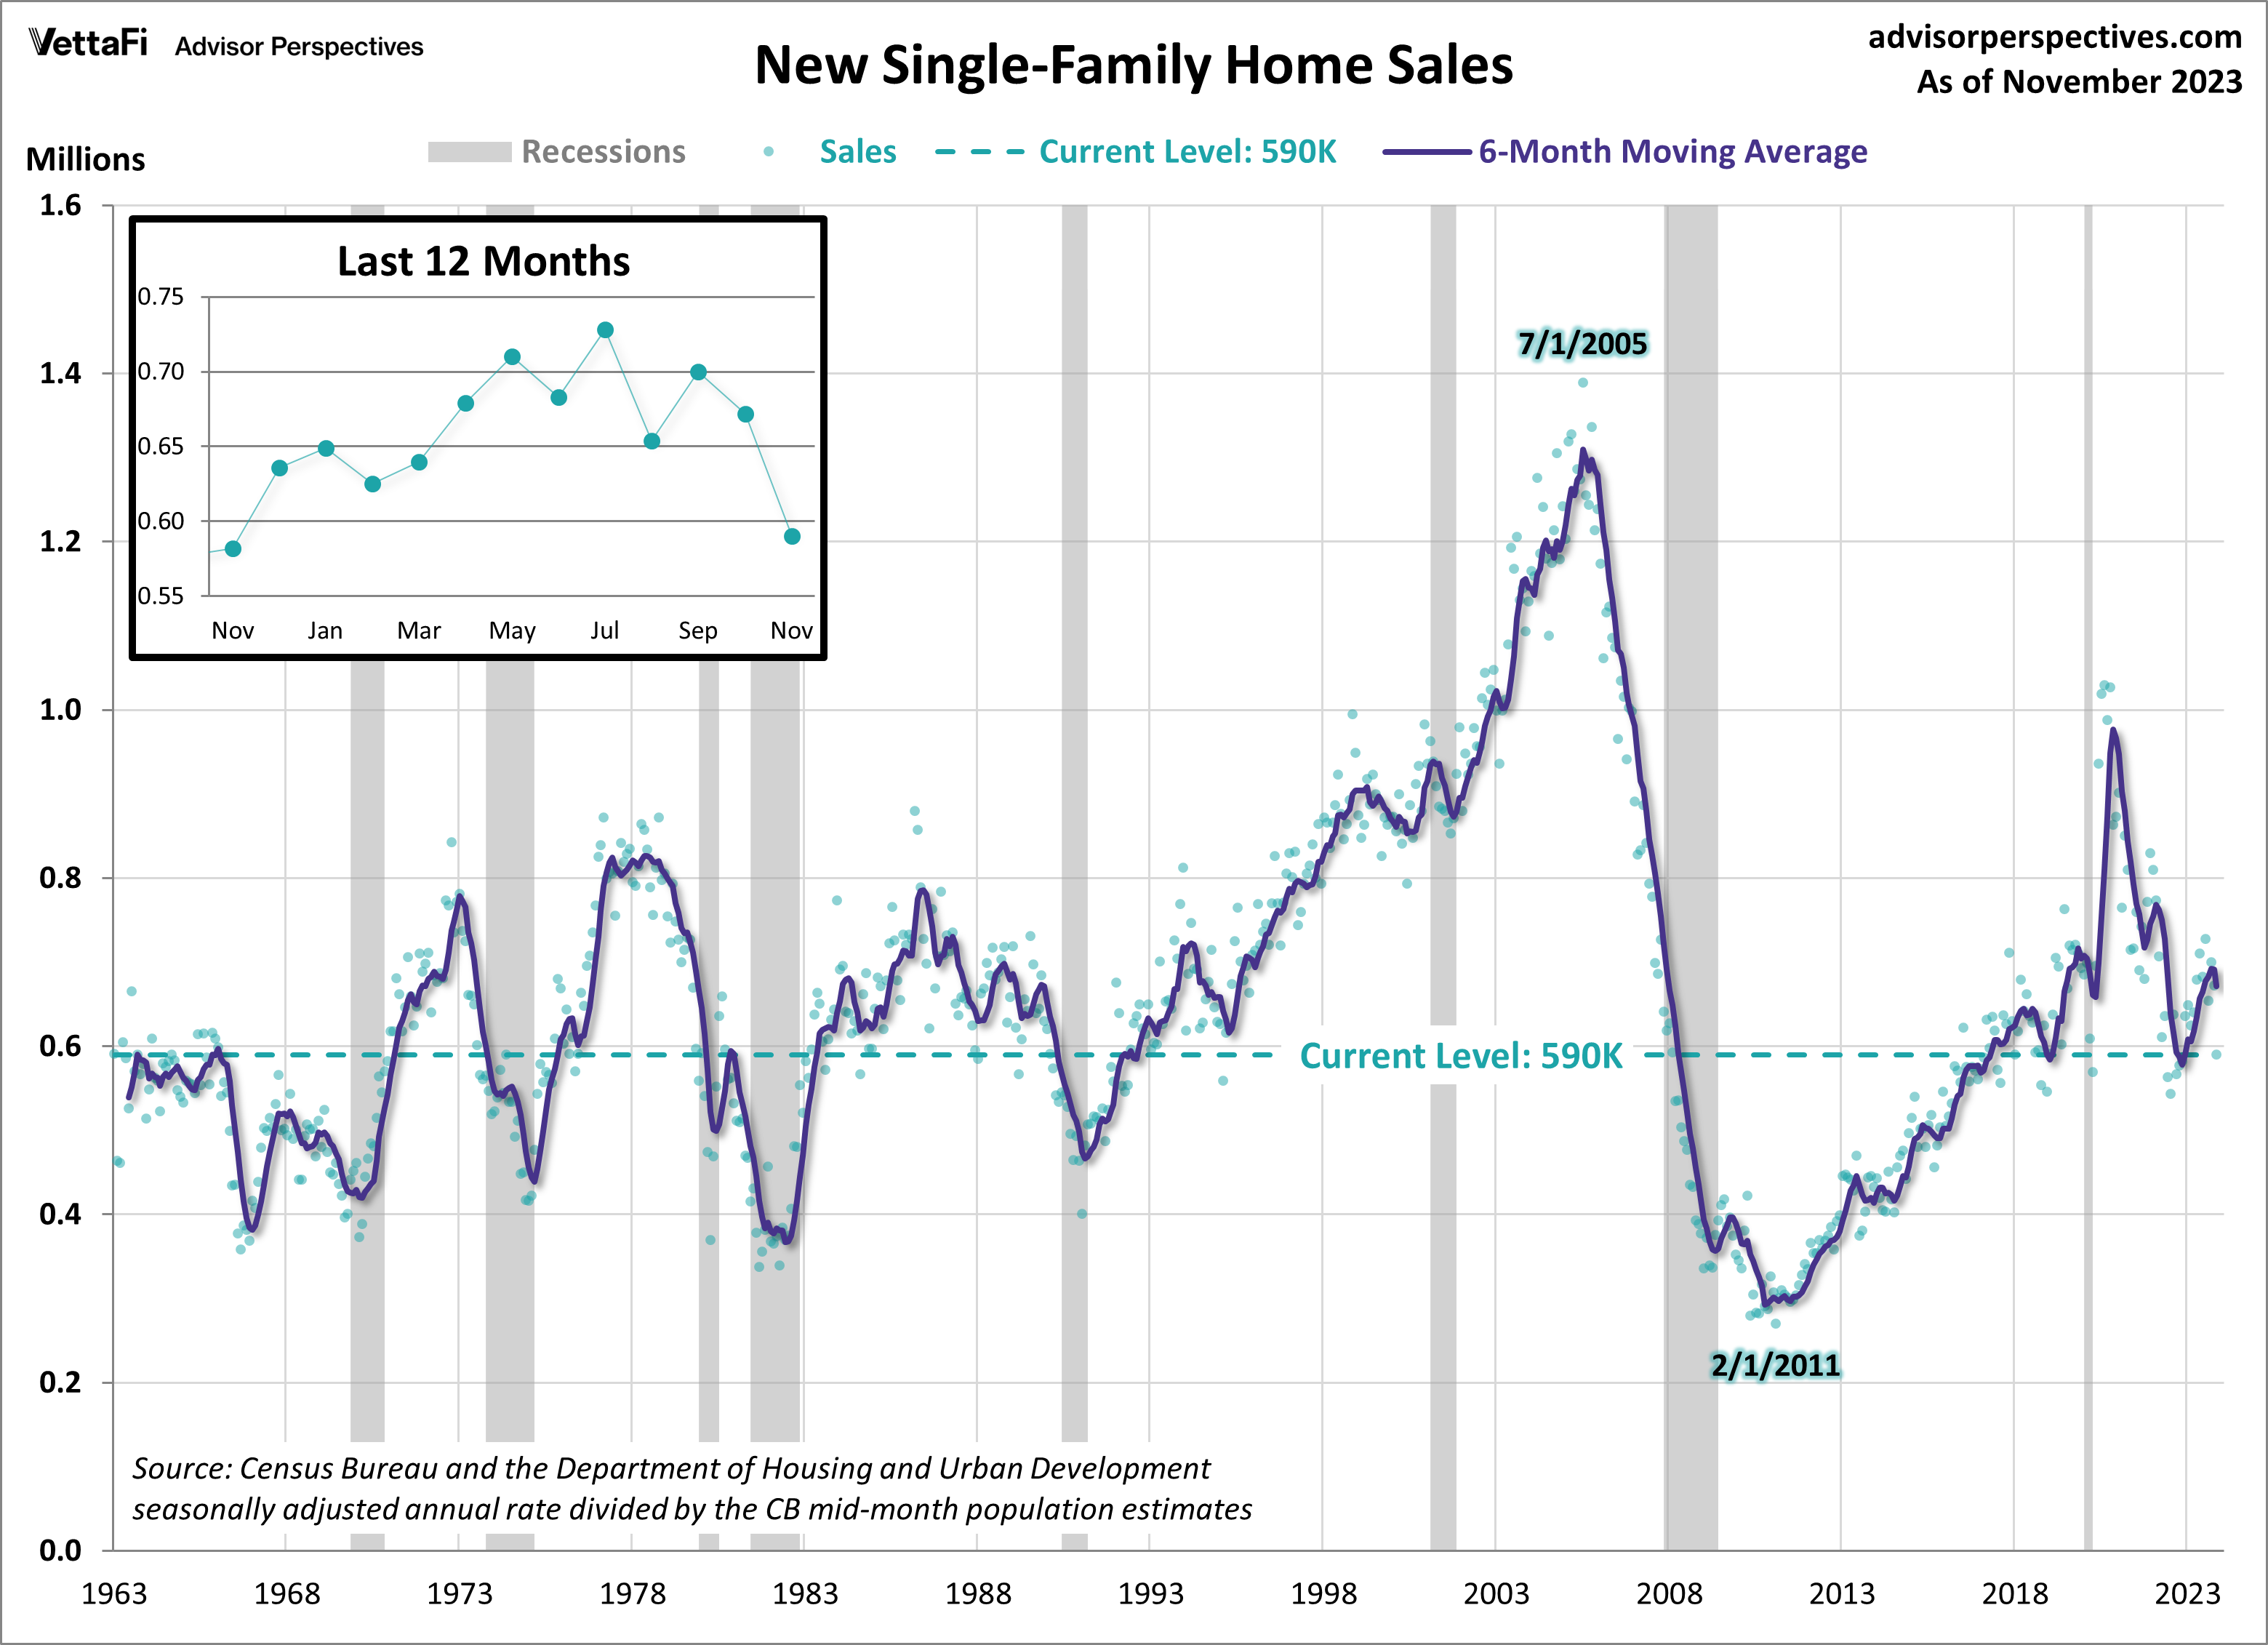 New Single-Family Home Sales